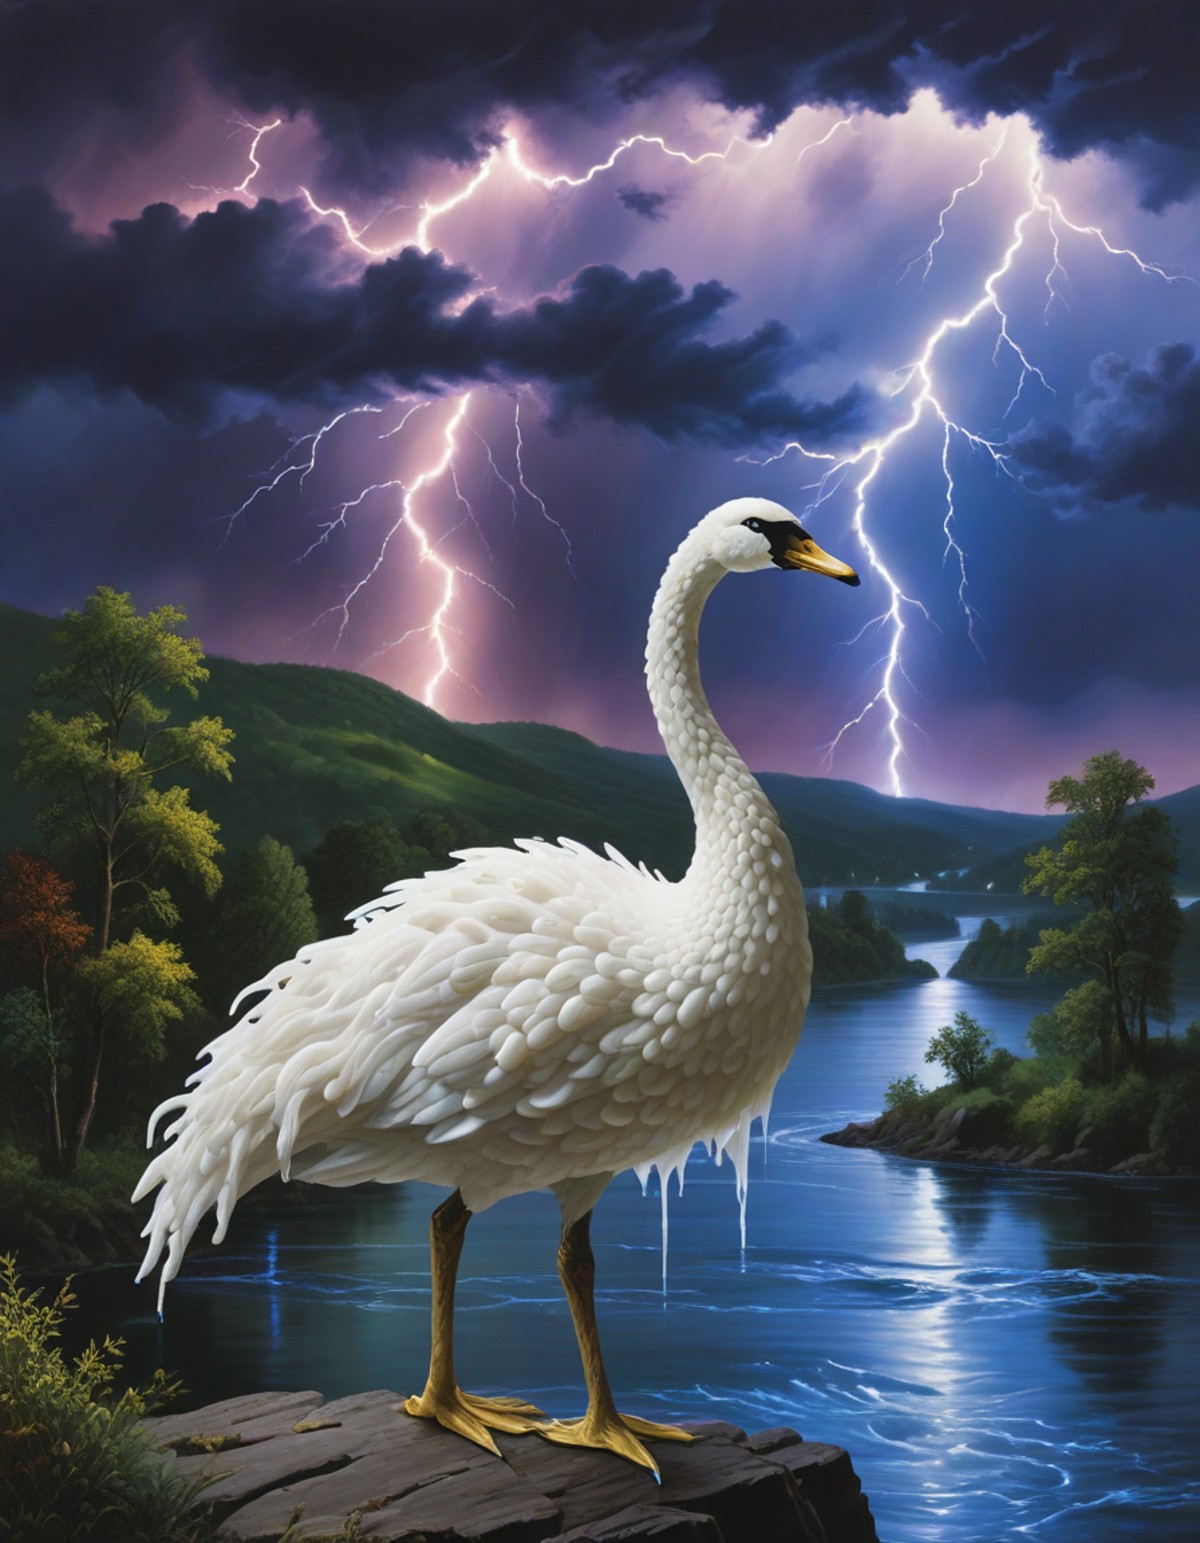 (lightning storm), A graceful swan made out of dripping candle wax, floating on the Hudson River. Background hills and tre...